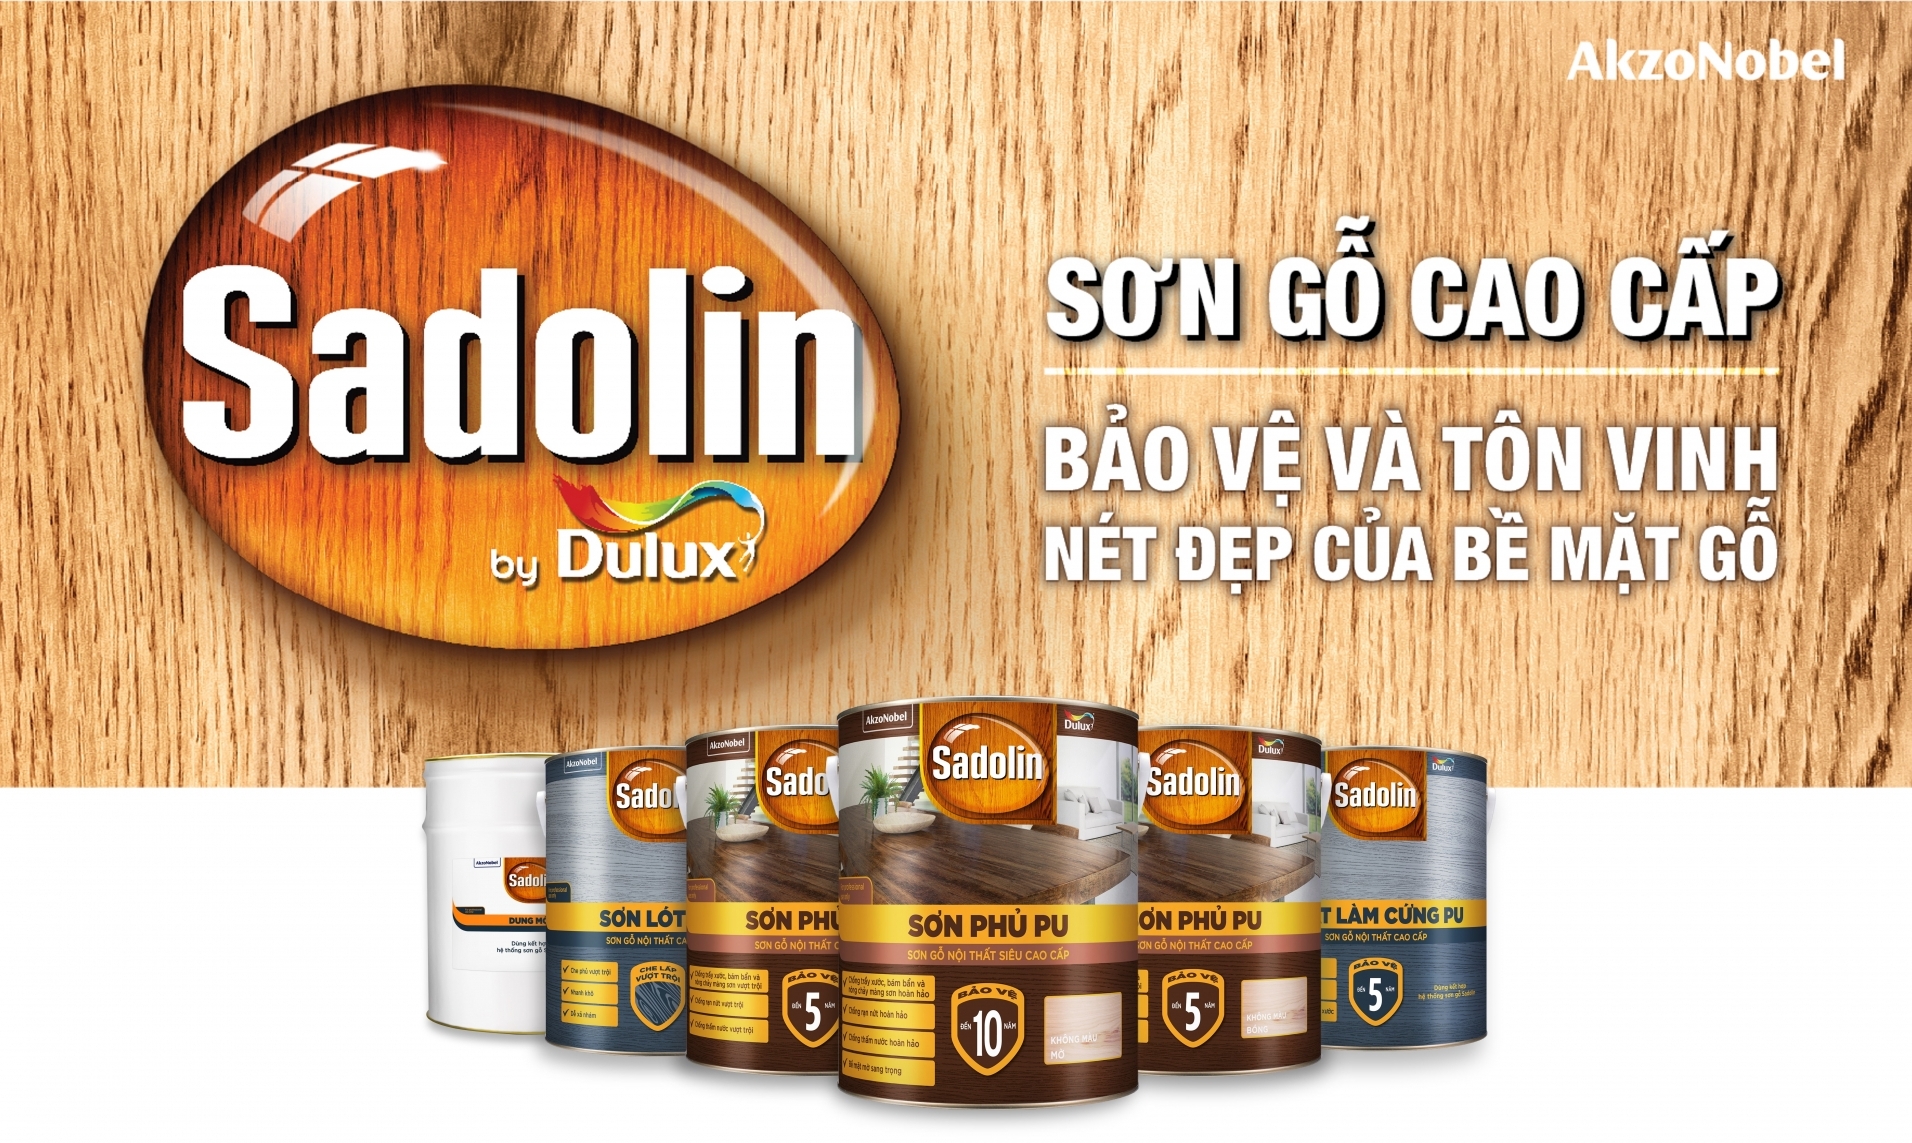 Sadolin from AkzoNobel brings global expert solution to enhance beauty of wood